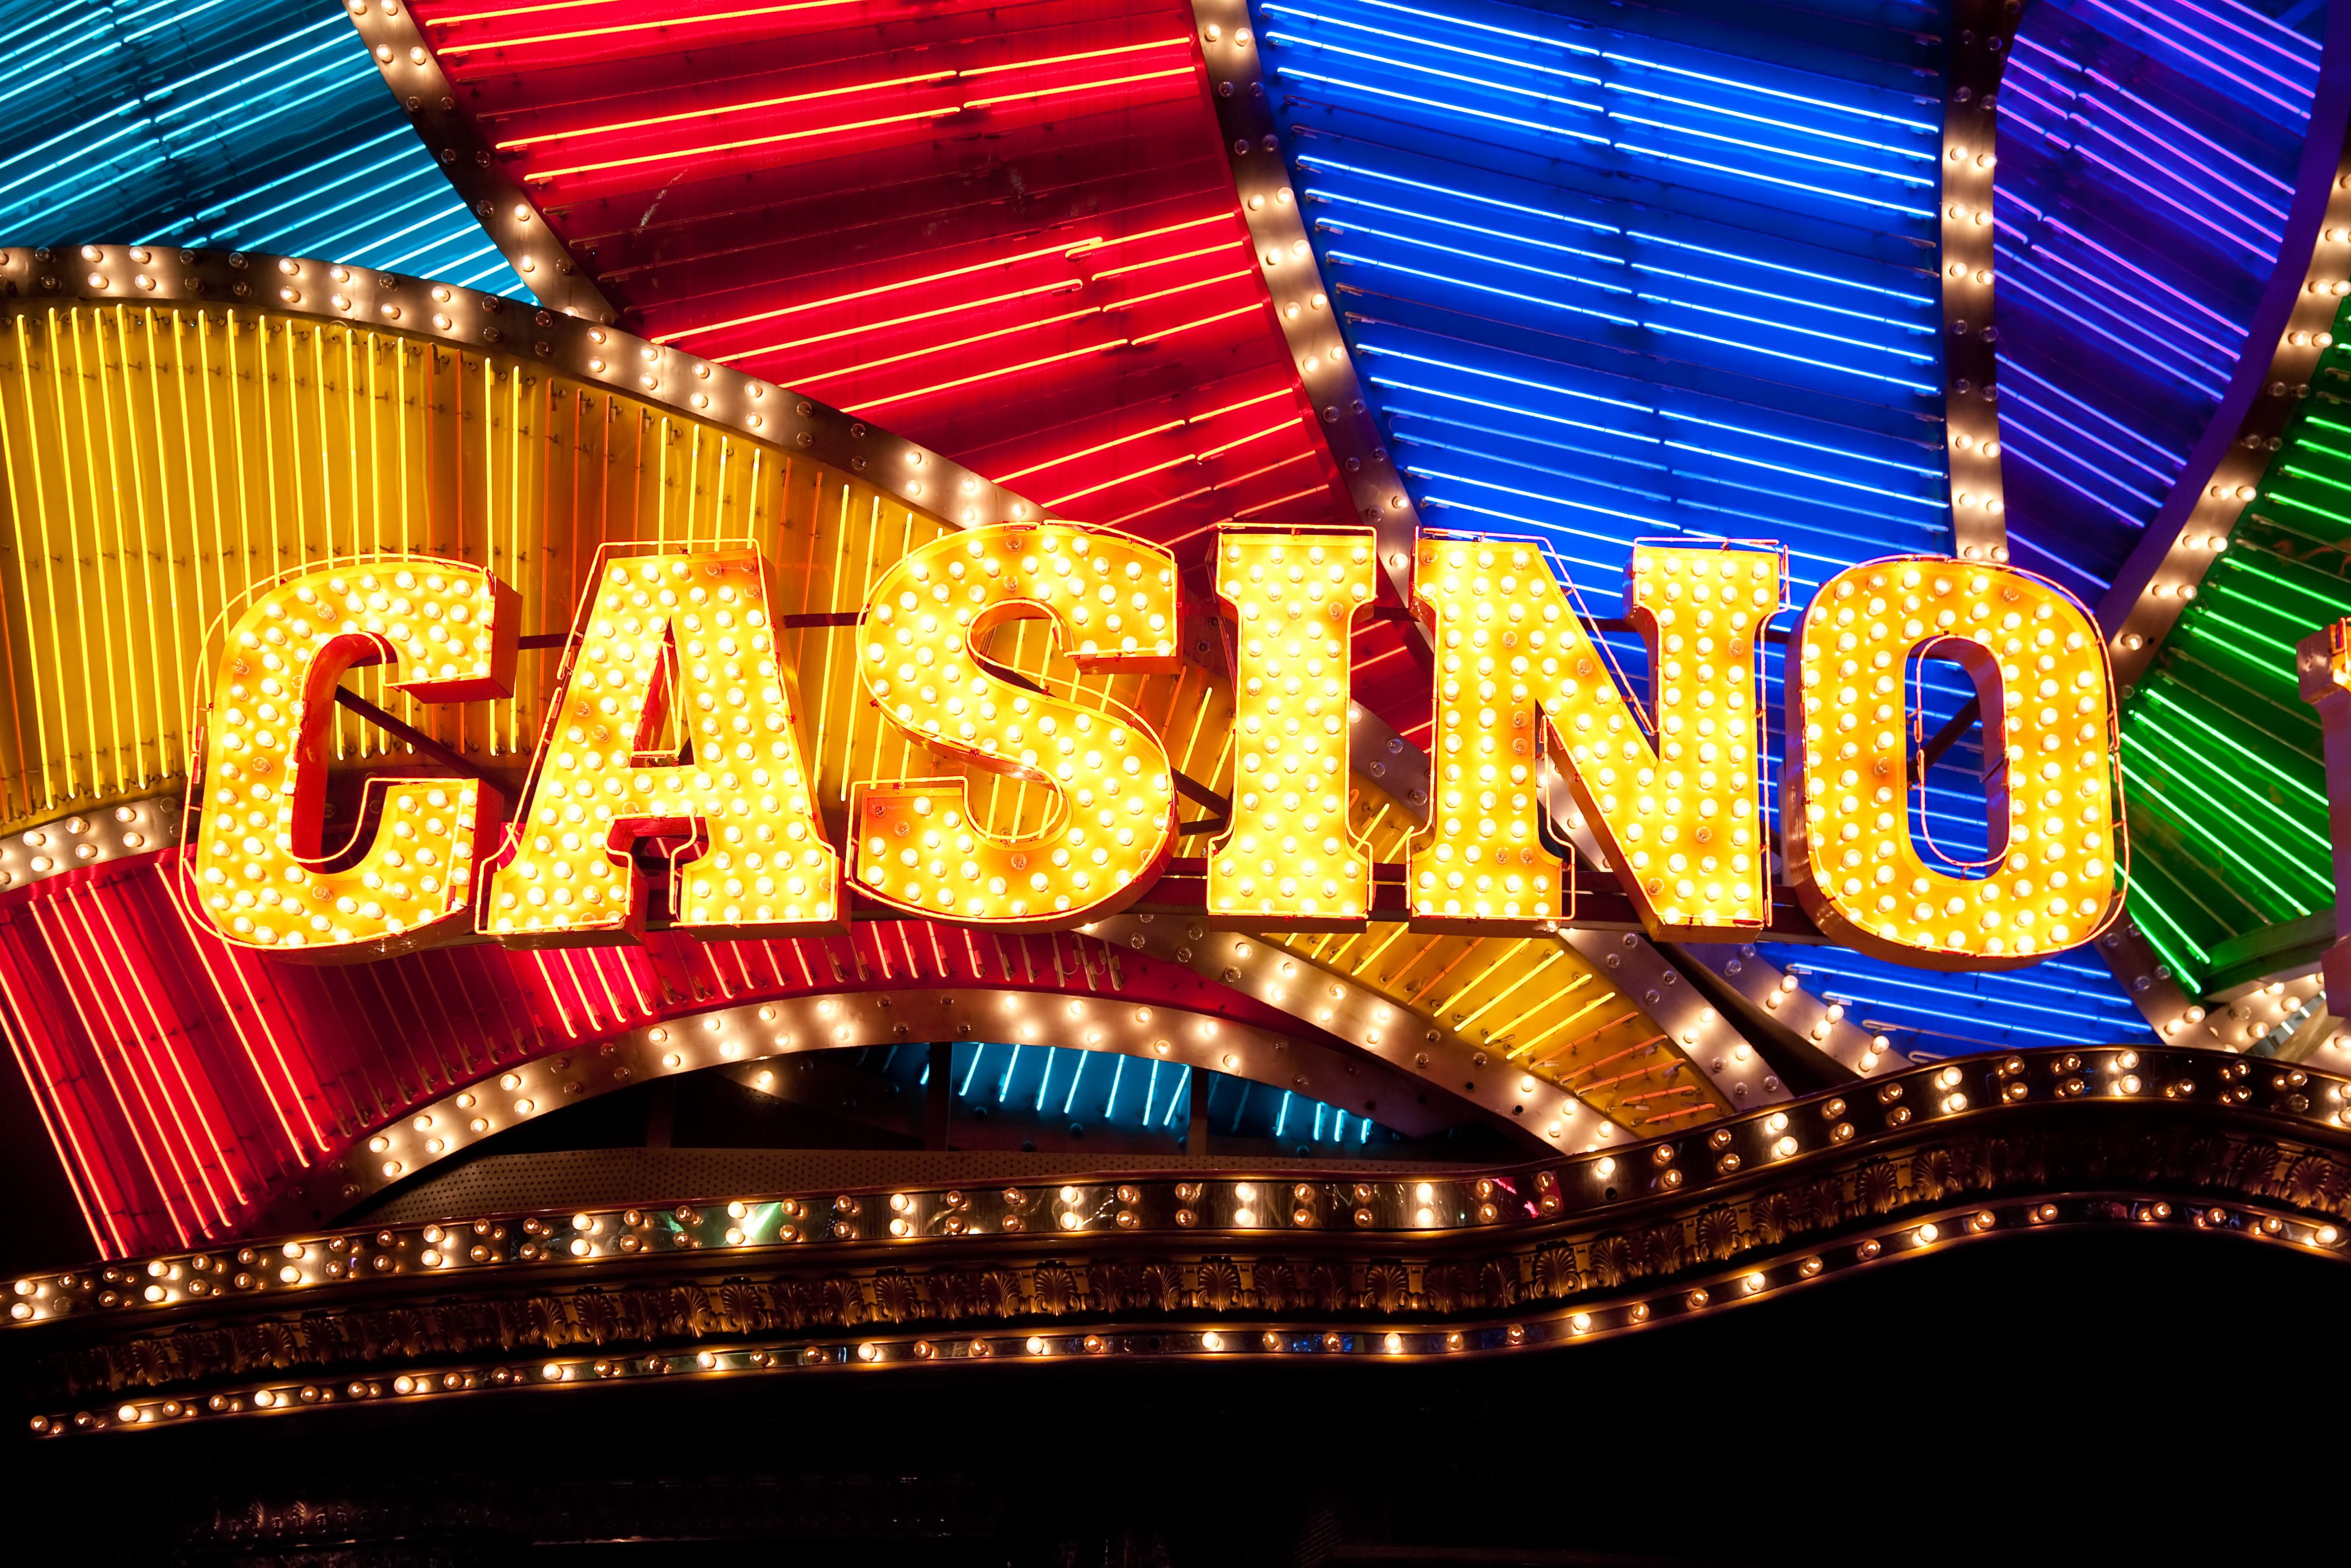 best paying usa online casinos